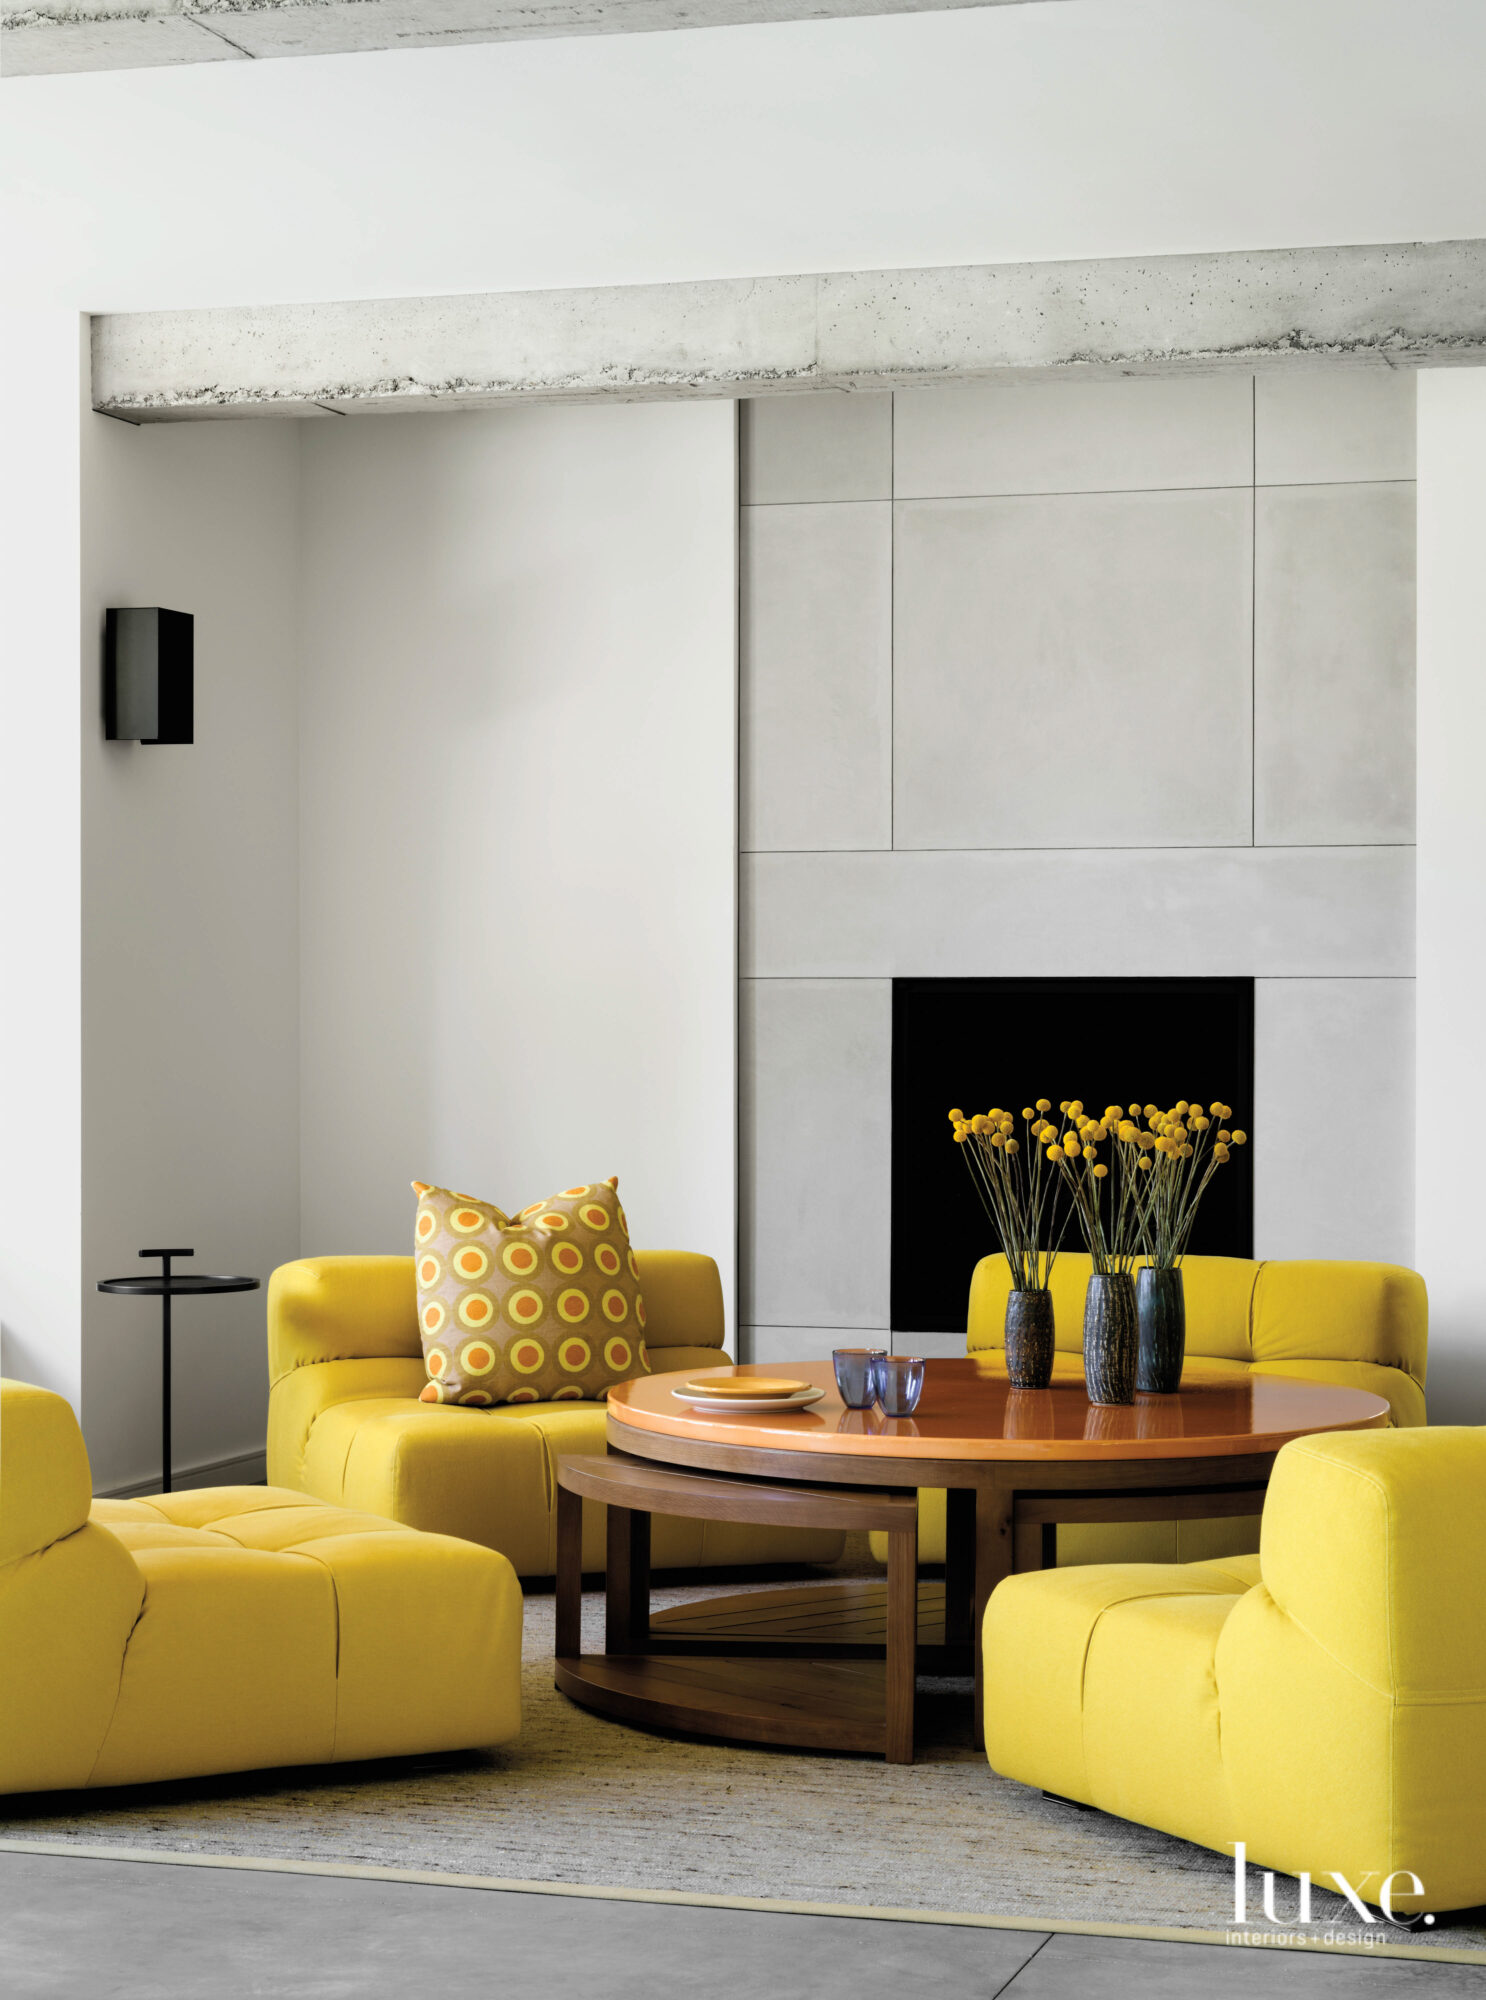 The recreation room has four yellow chairs gathered around a circular table near the fireplace.